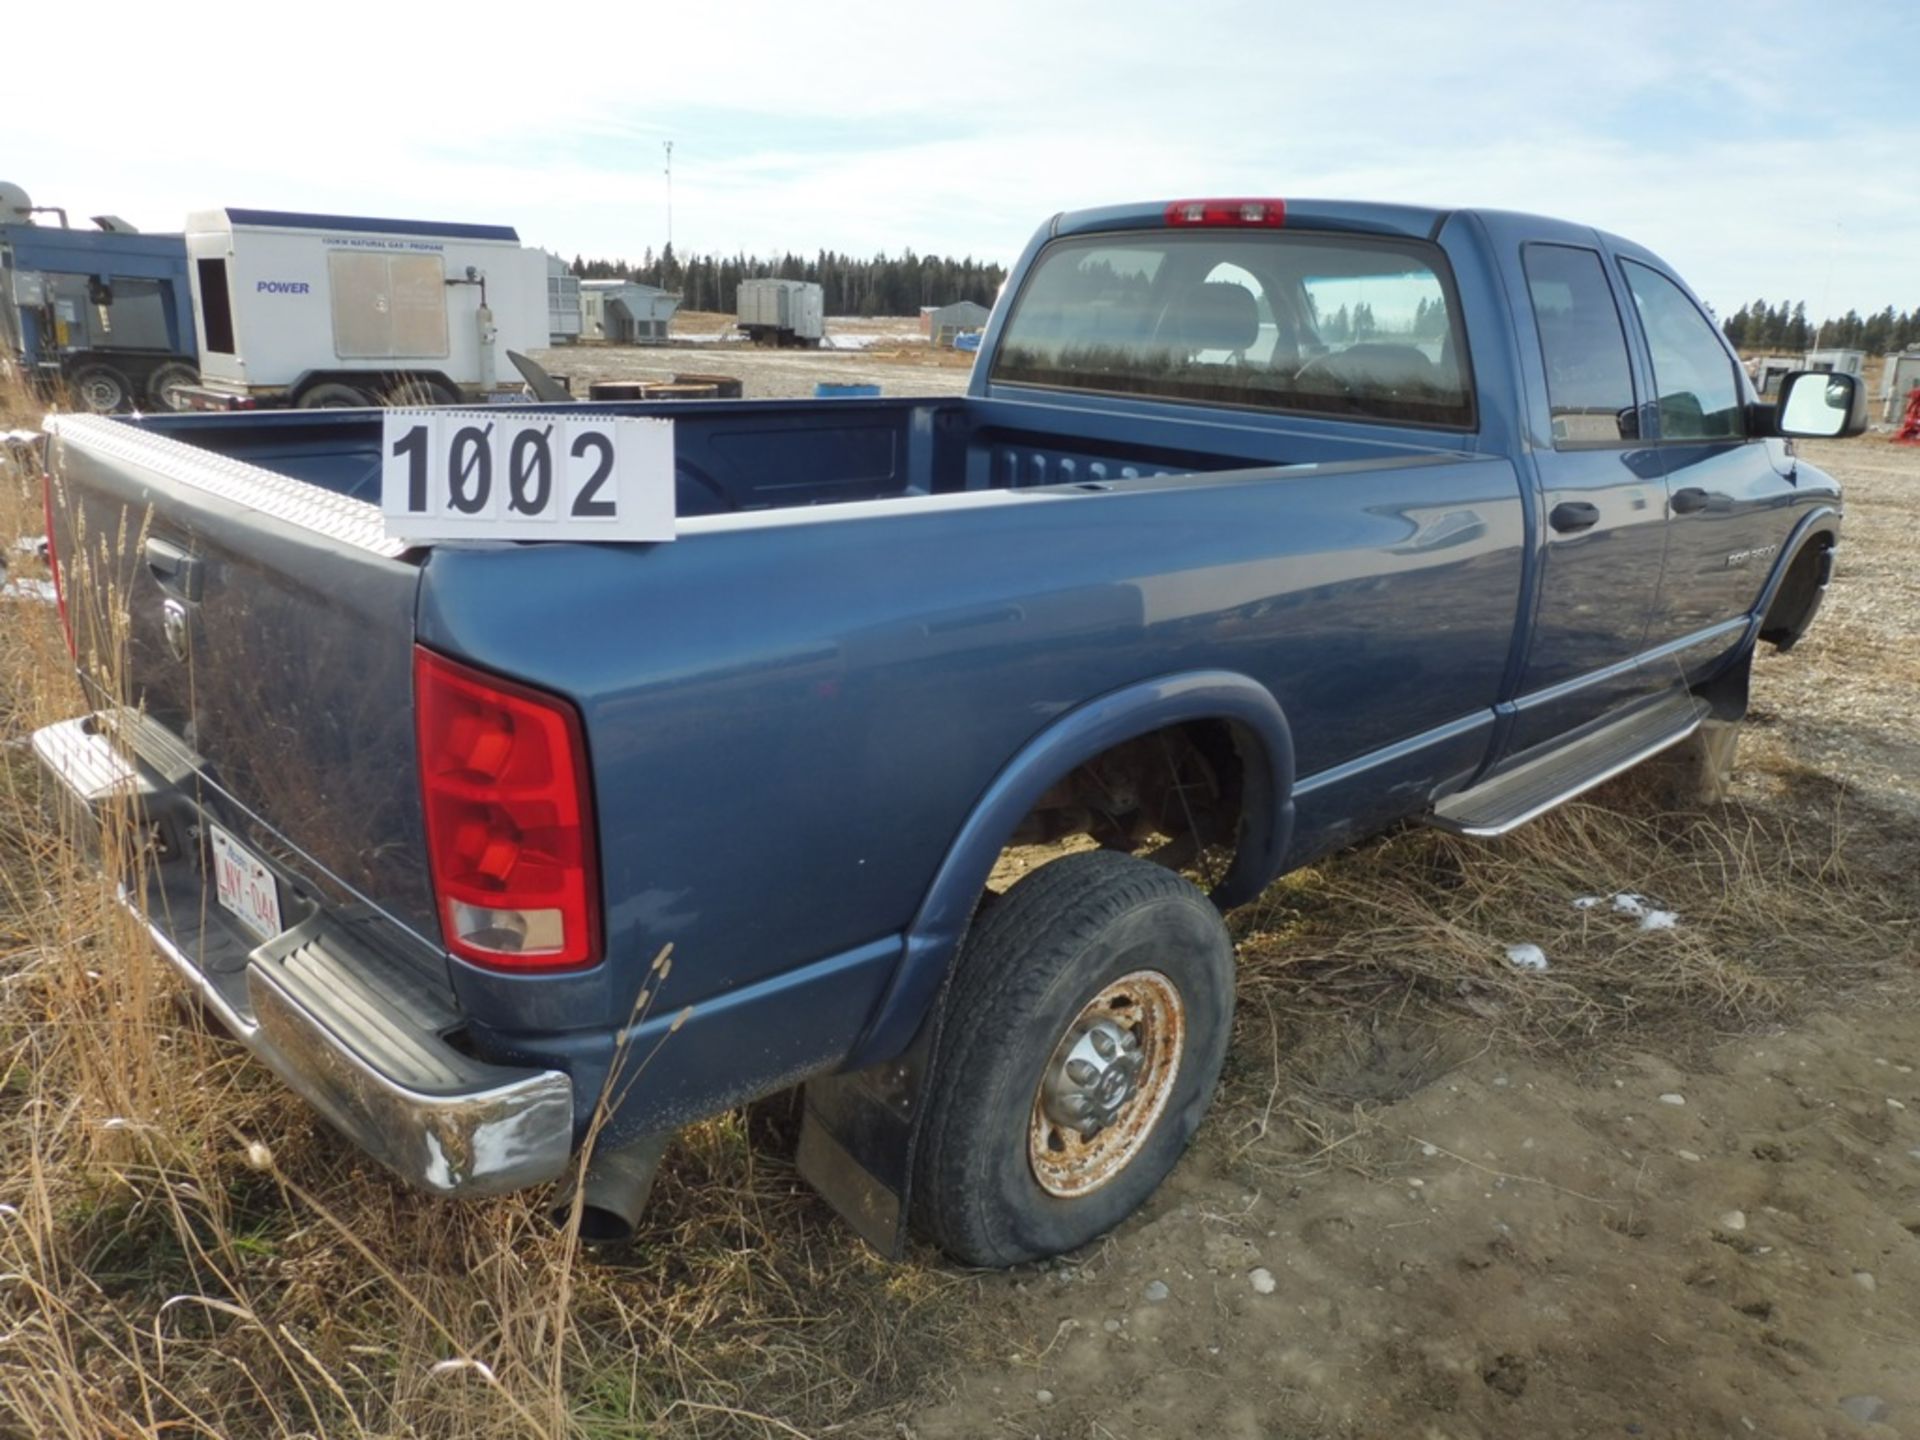 2005 Dodge RAM 3500 SLE QUAD CAB LB 4X4 TRUCK SELLING AS IS - PARTS ONLY - Image 2 of 2